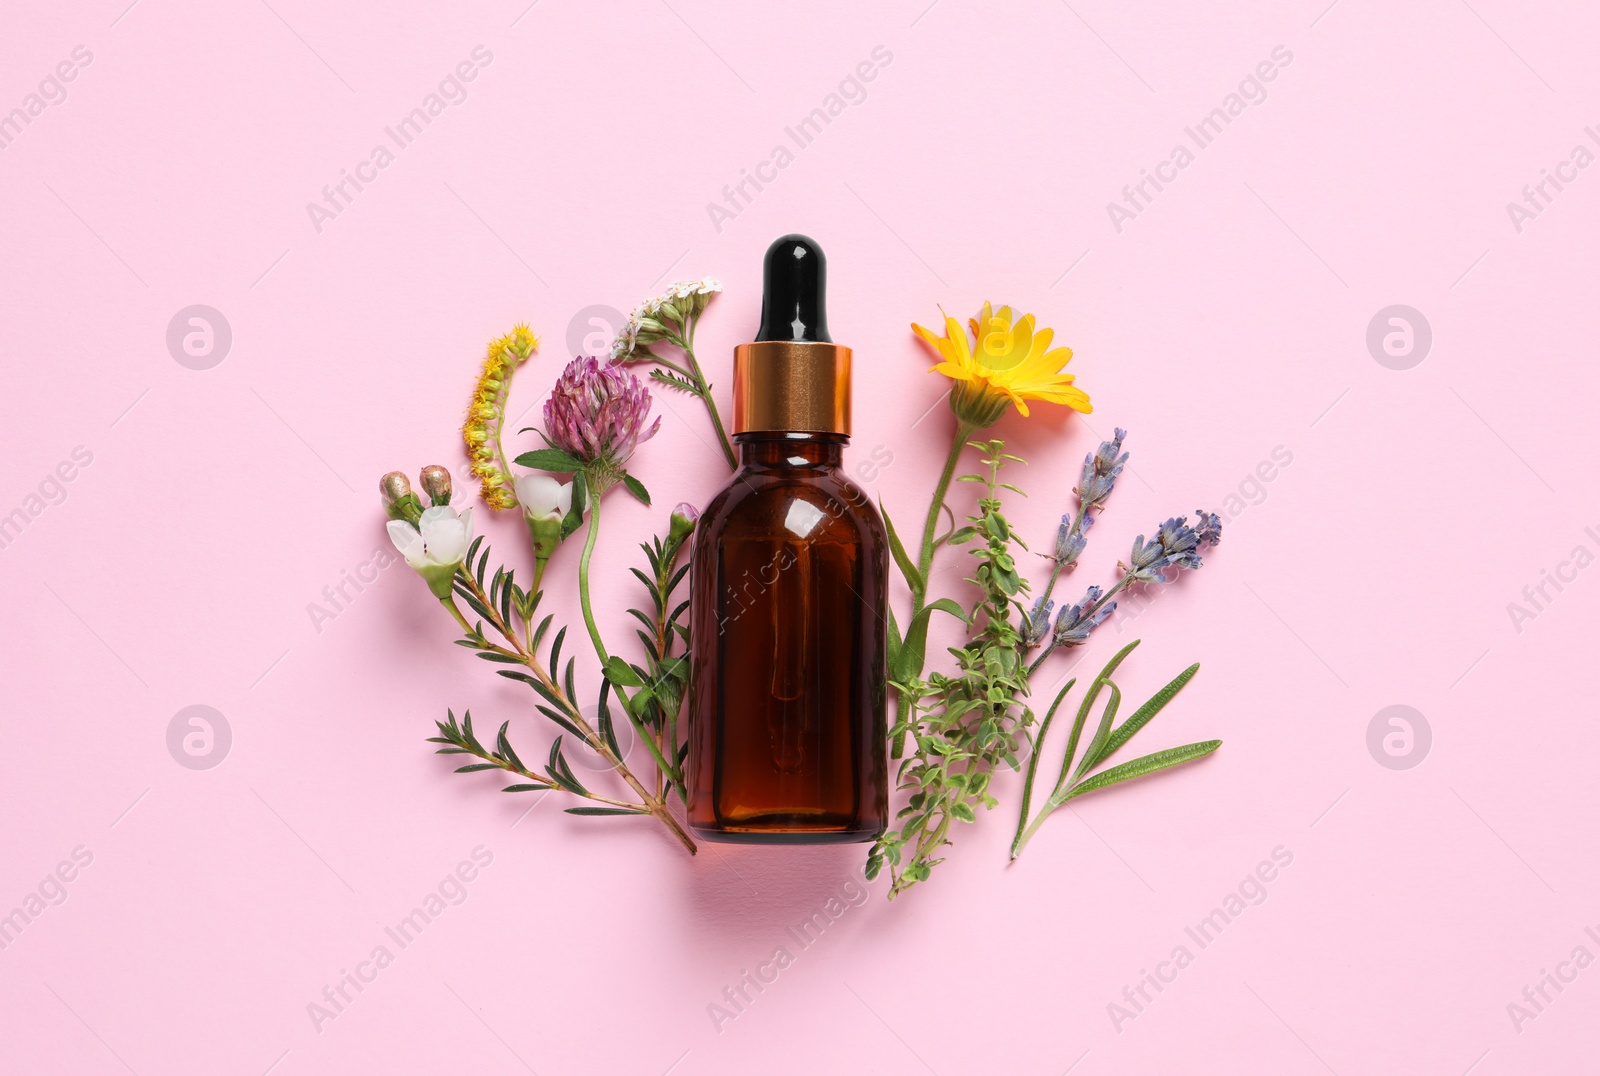 Photo of Bottle of essential oil, different herbs and flowers on pink background, flat lay